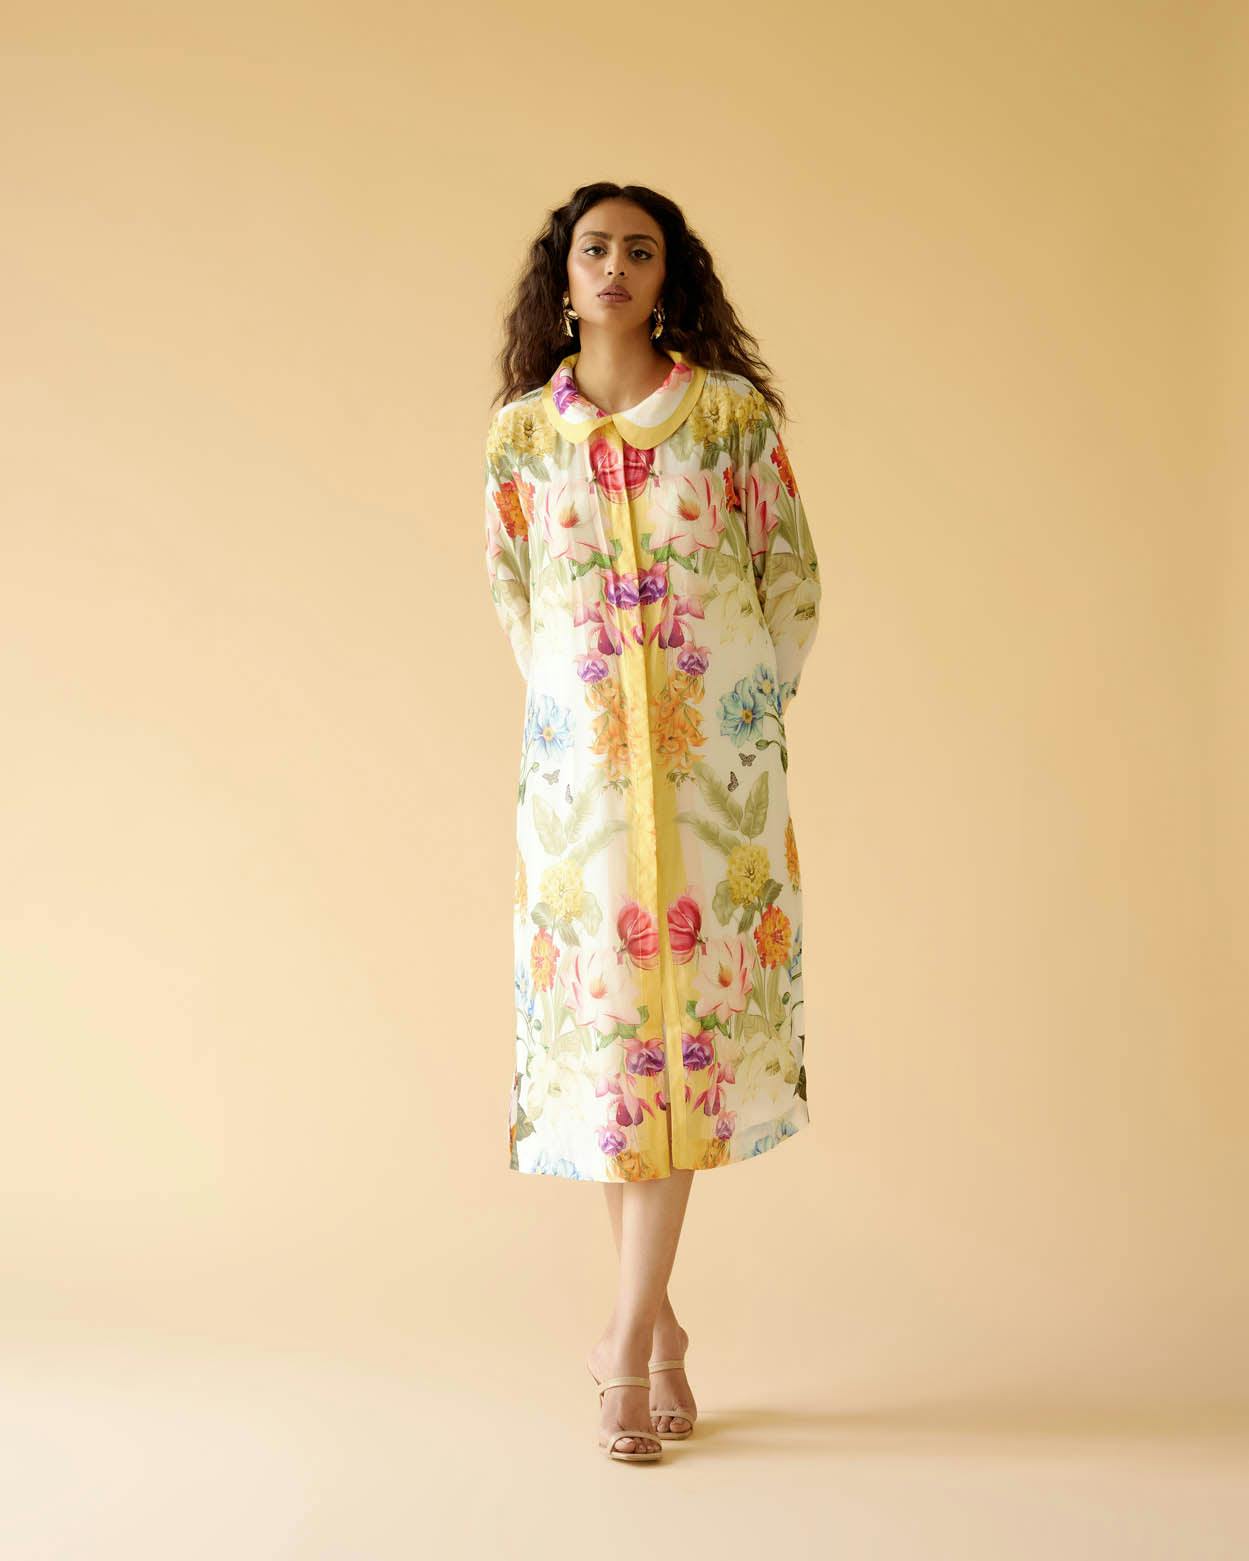 Home Garden Shirt Dress, a product by Moh India